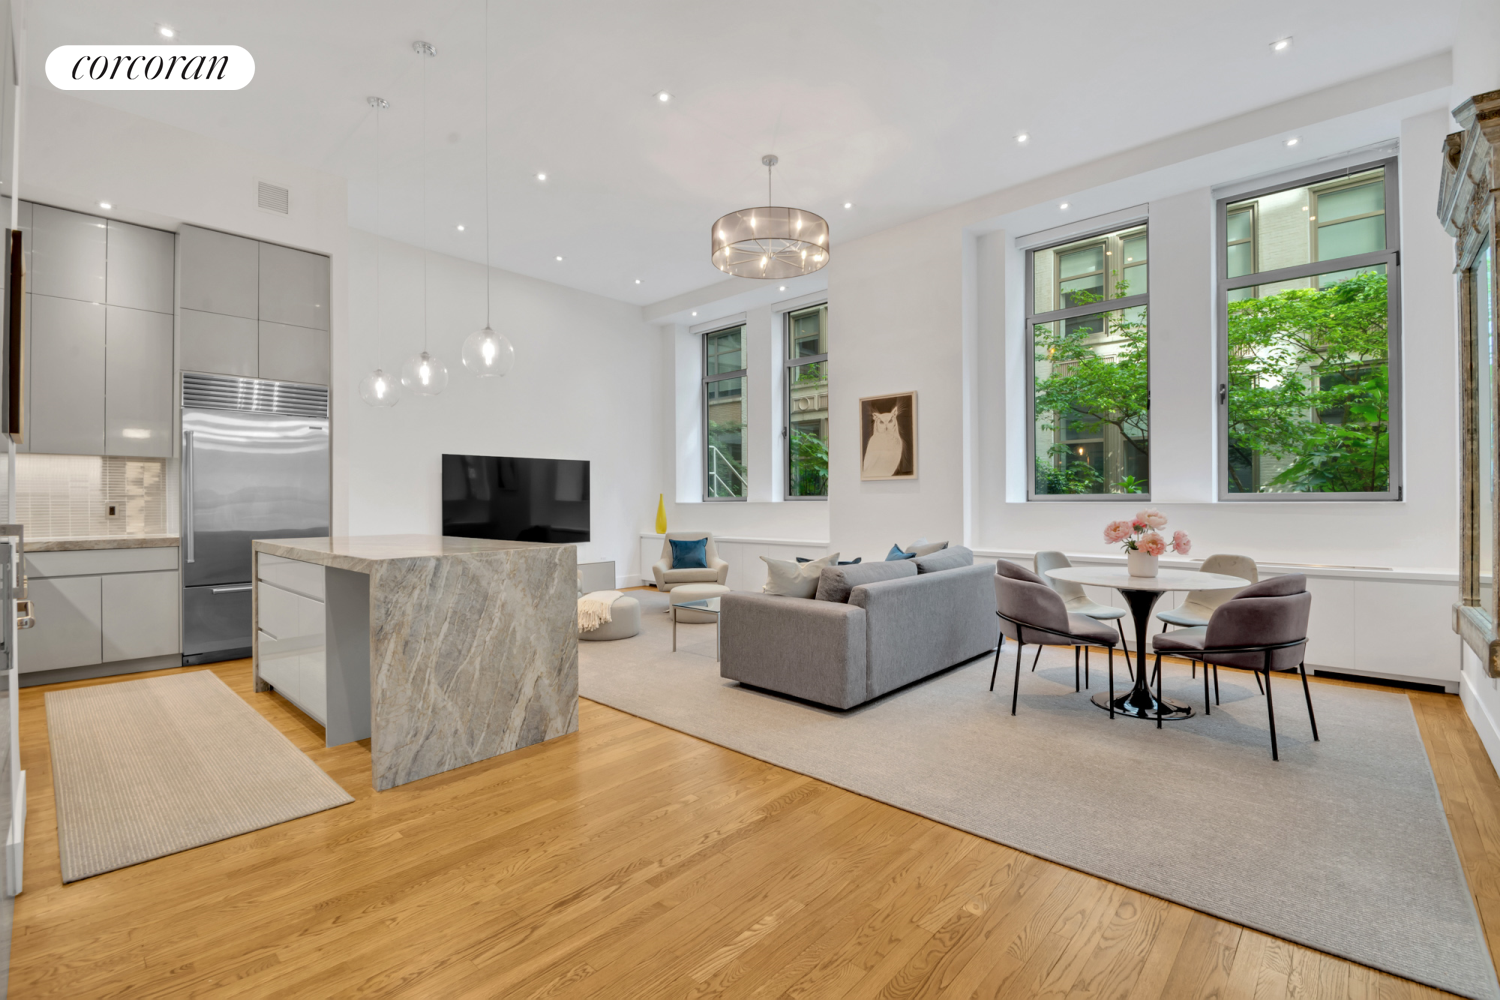 252 7th Avenue 3C, Chelsea, Downtown, NYC - 1 Bedrooms  
1 Bathrooms  
1 Rooms - 